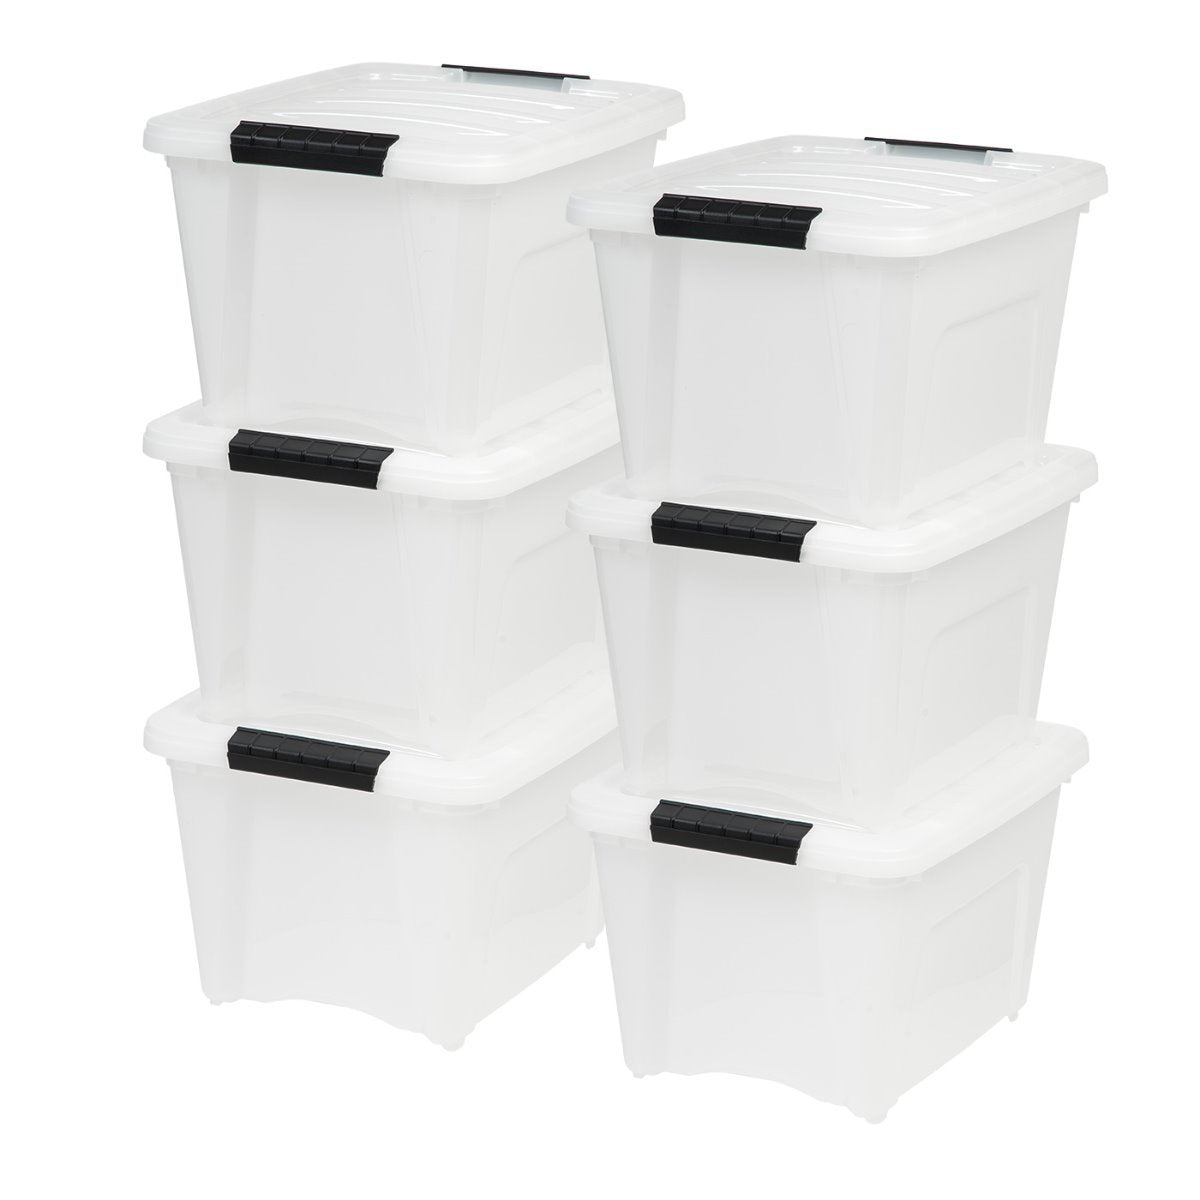 Really Useful Box 17 Liter Plastic Stackable Storage Container w/ Snap Lid  & Built-In Clip Lock Handles for Home & Office Organization, Clear (2 Pack)